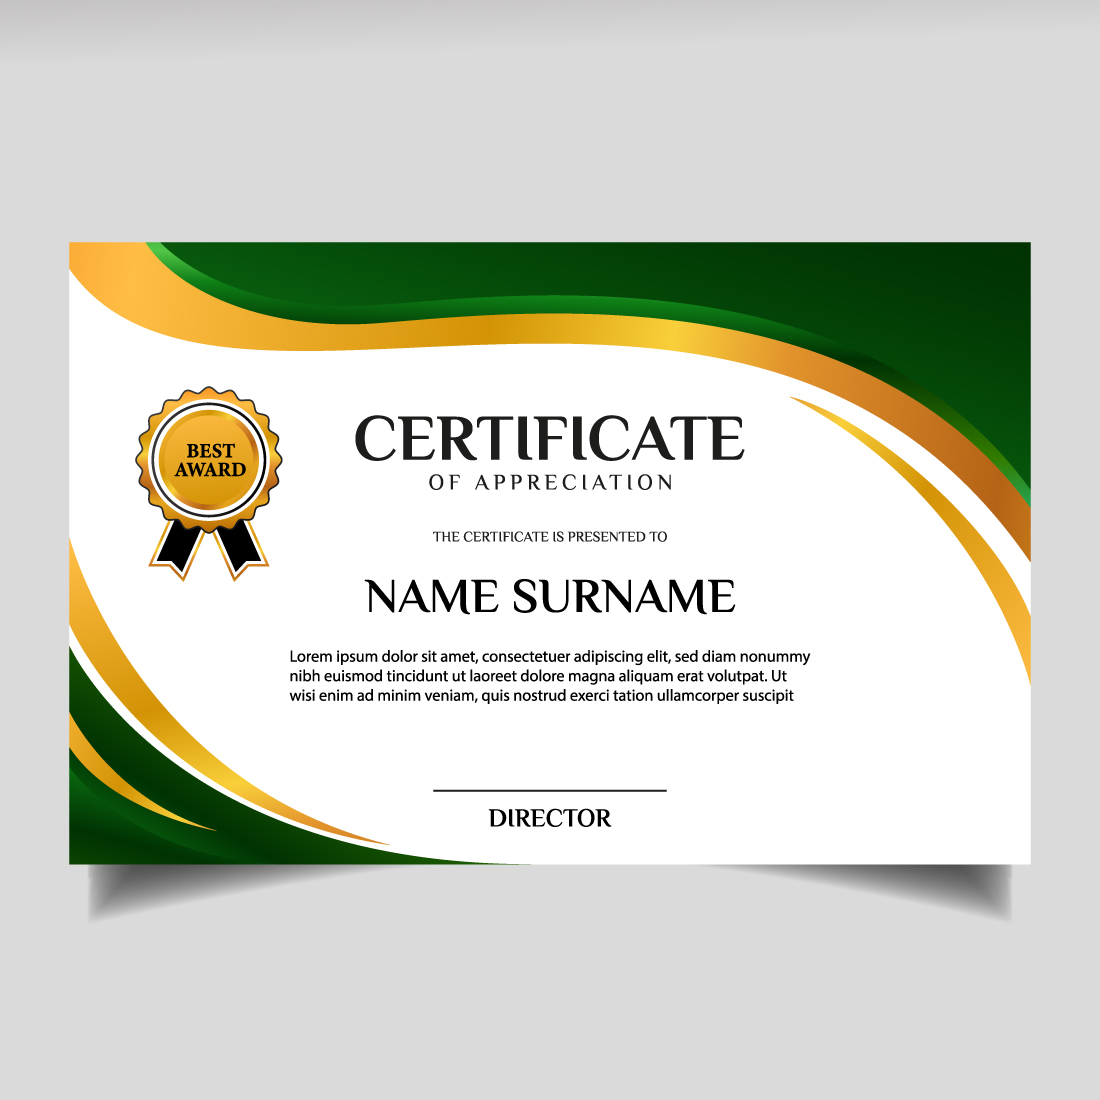 Modern and Simple Certificate Design Template